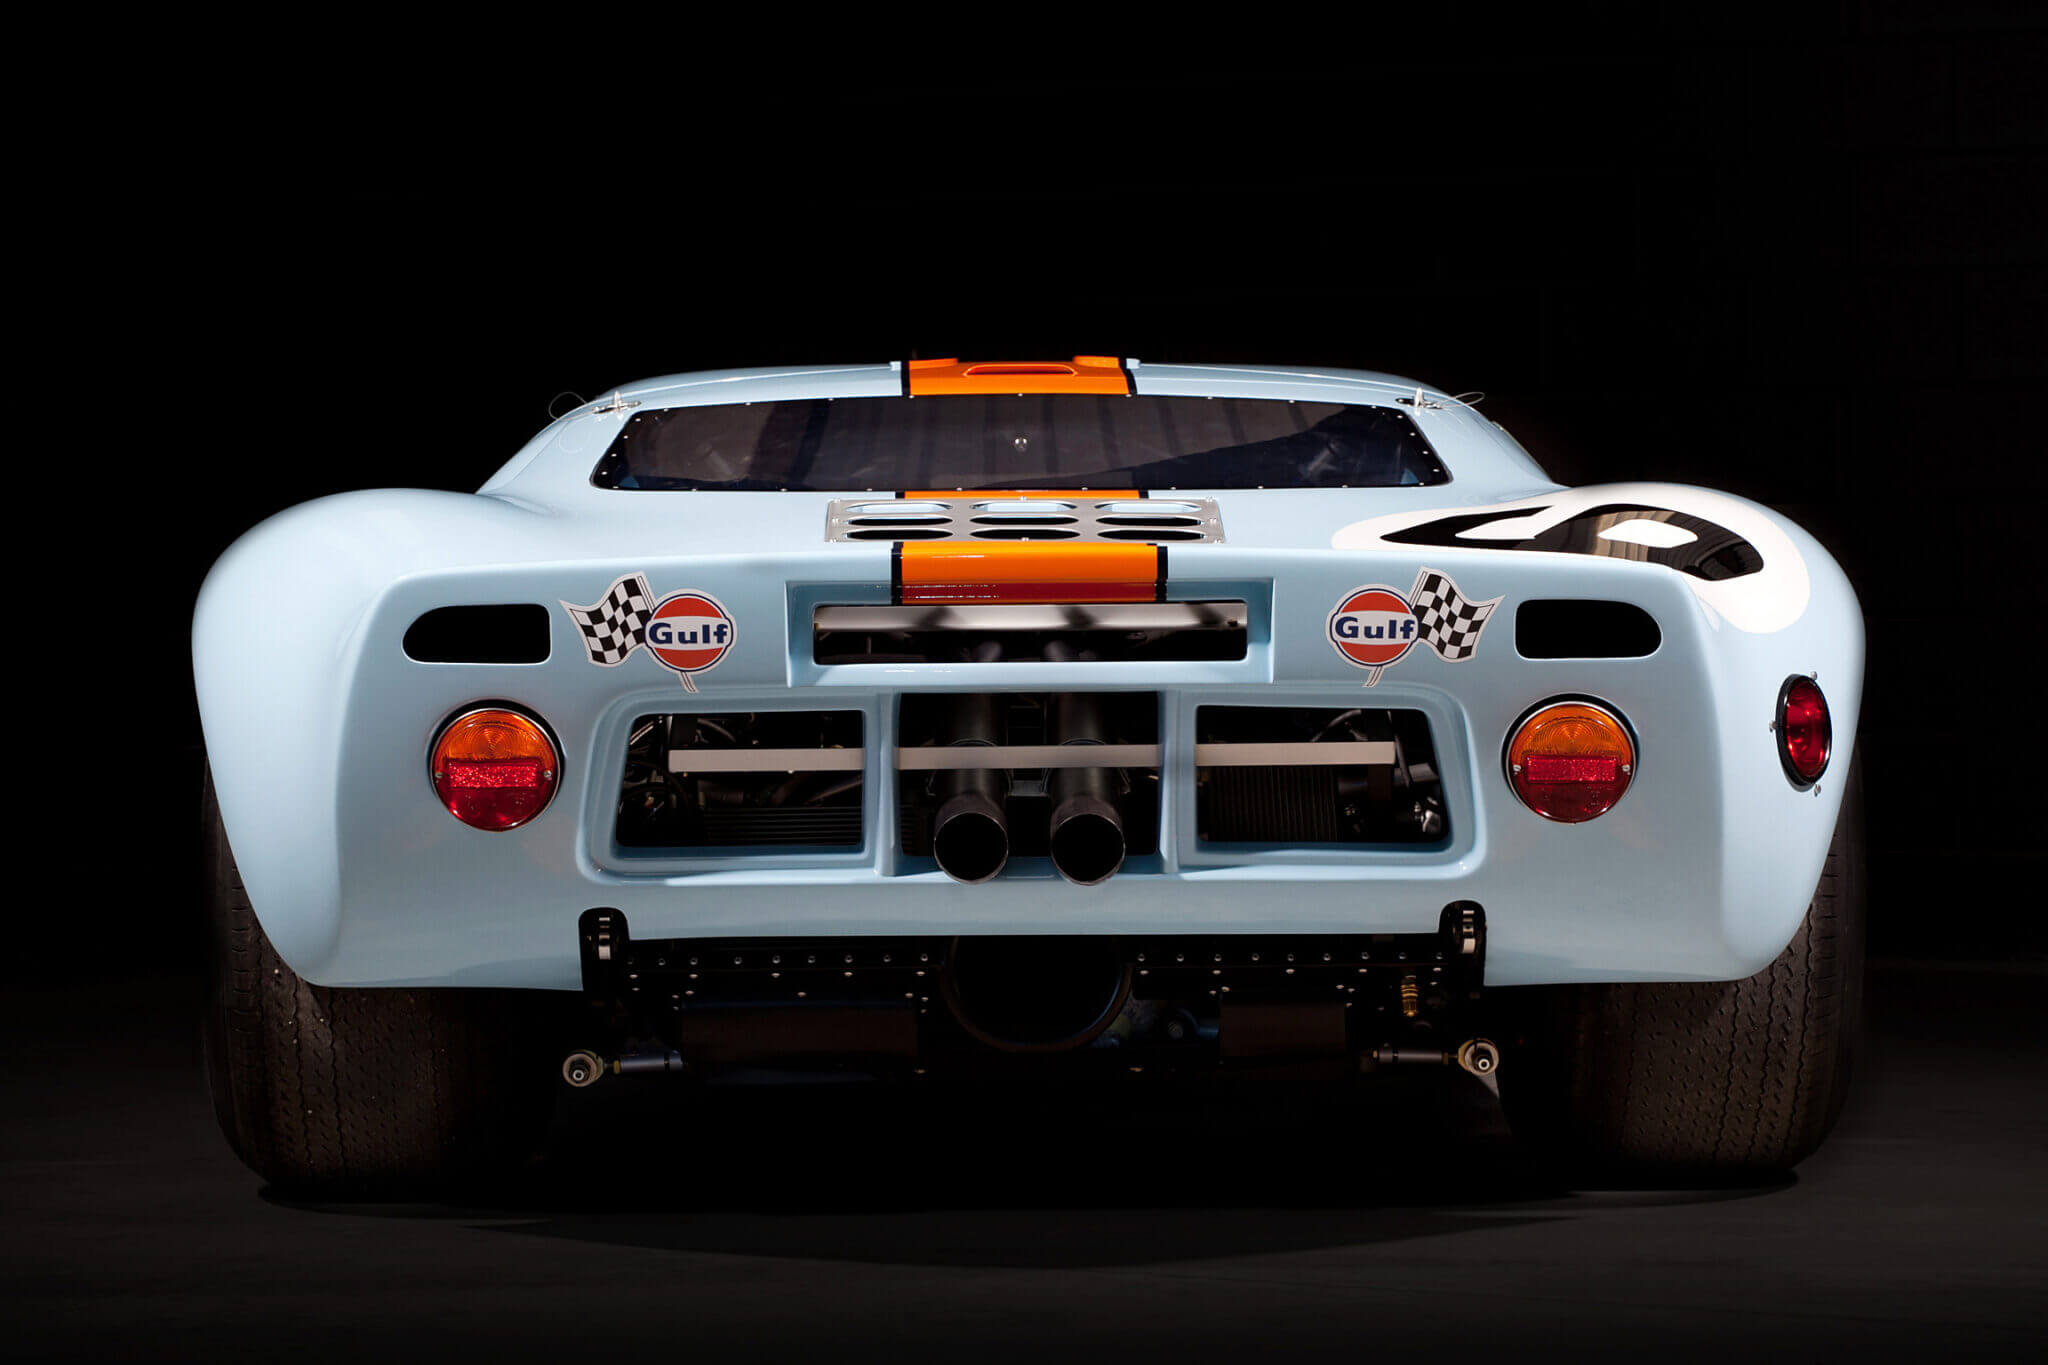 Superformance Rebuilds History With Original Specification 1969 GT40s –  GTPlanet